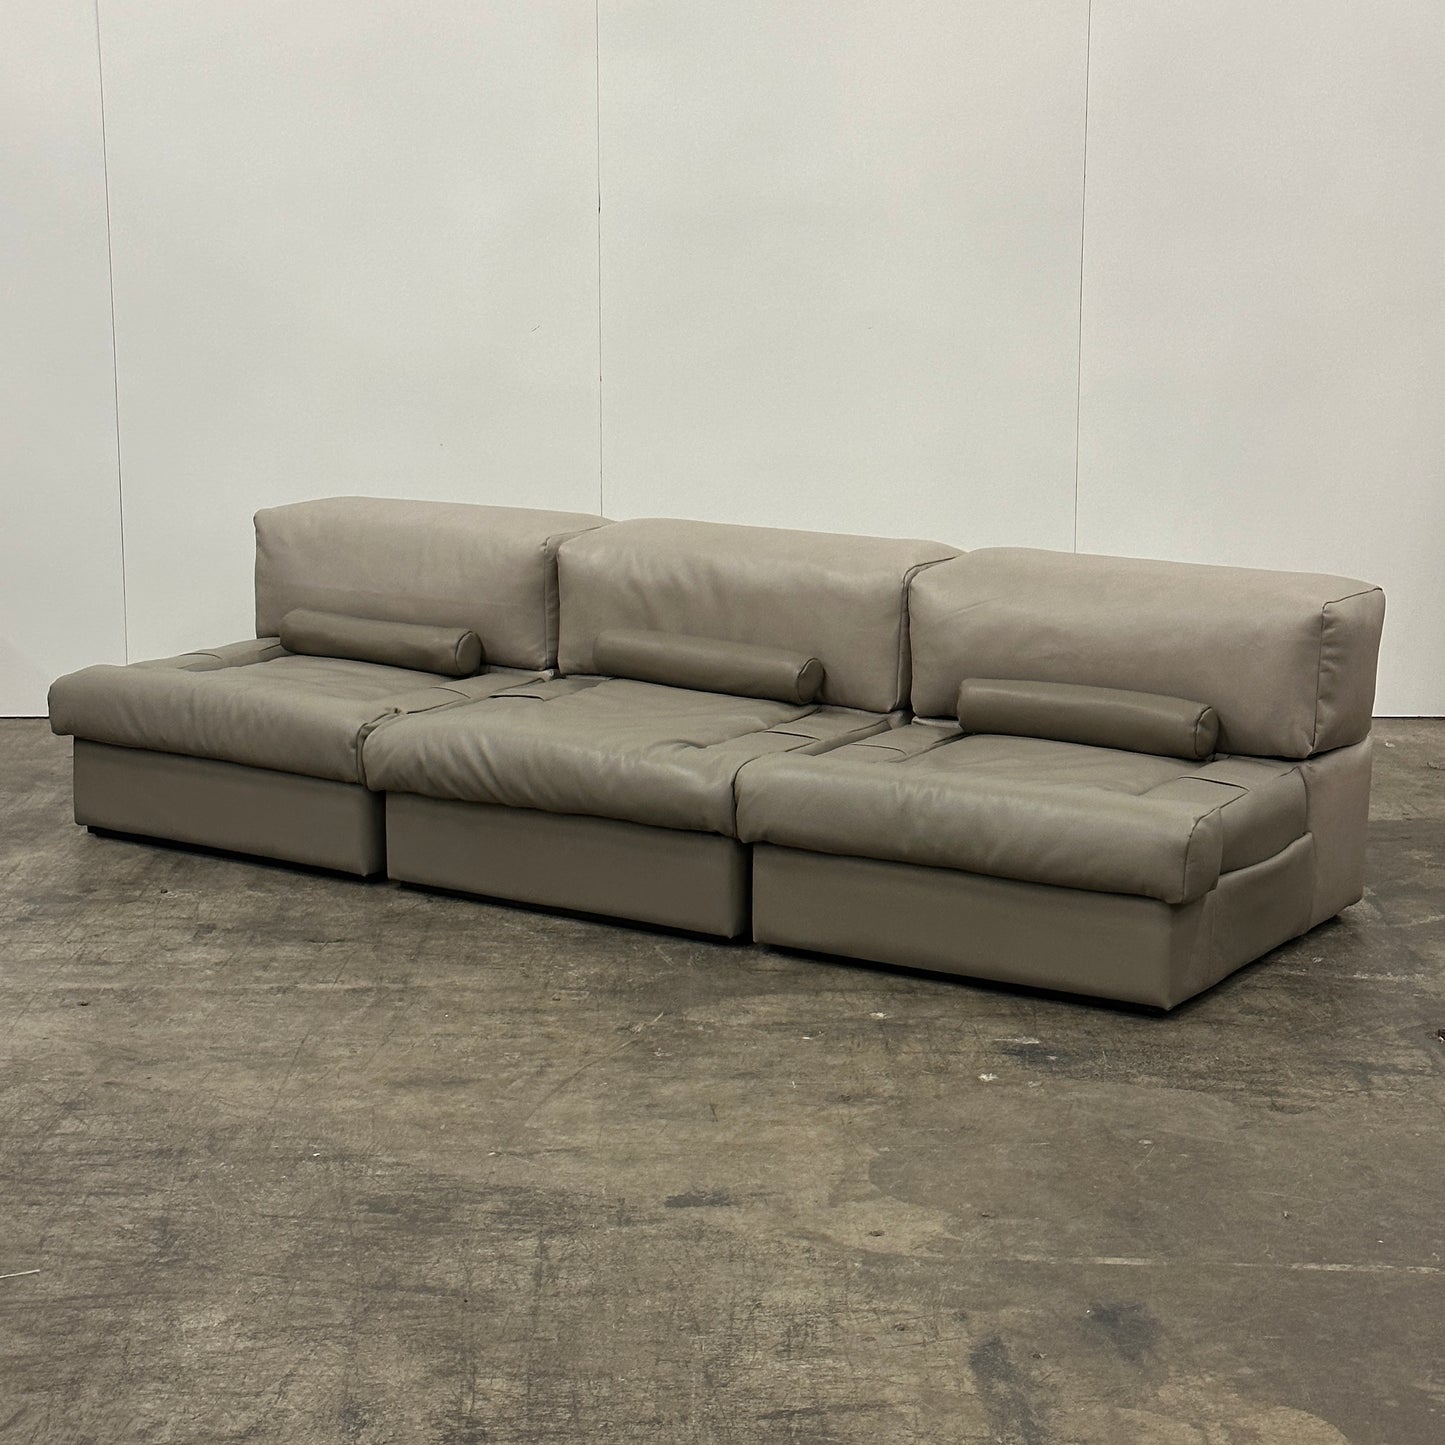 Brazilian Modular Leather Sofa/Chairs by Percival Lafer